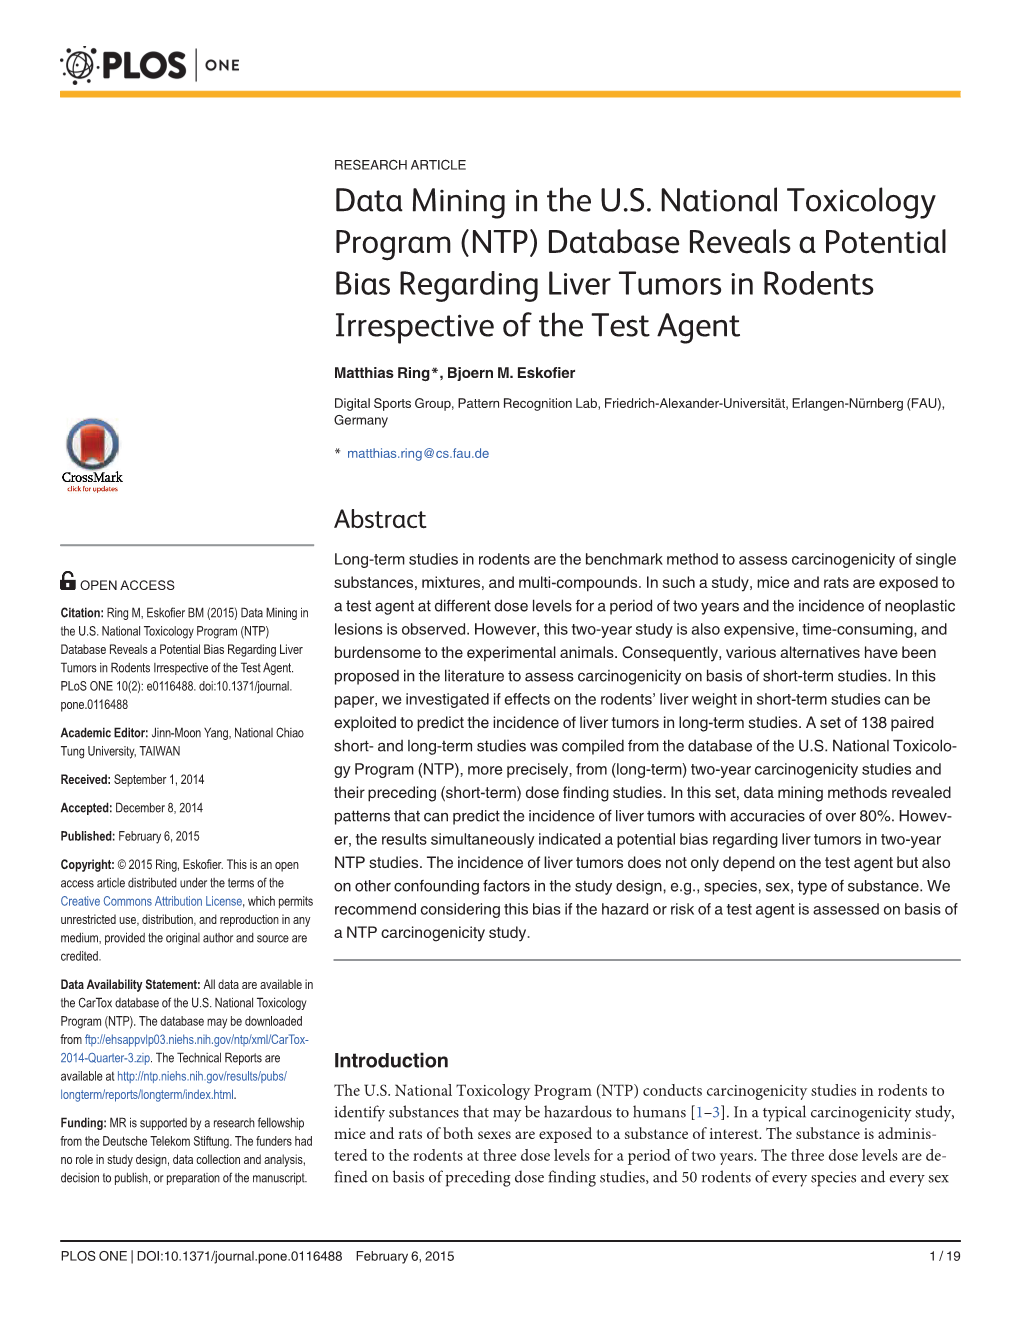 Data Mining in the US National Toxicology Program (NTP